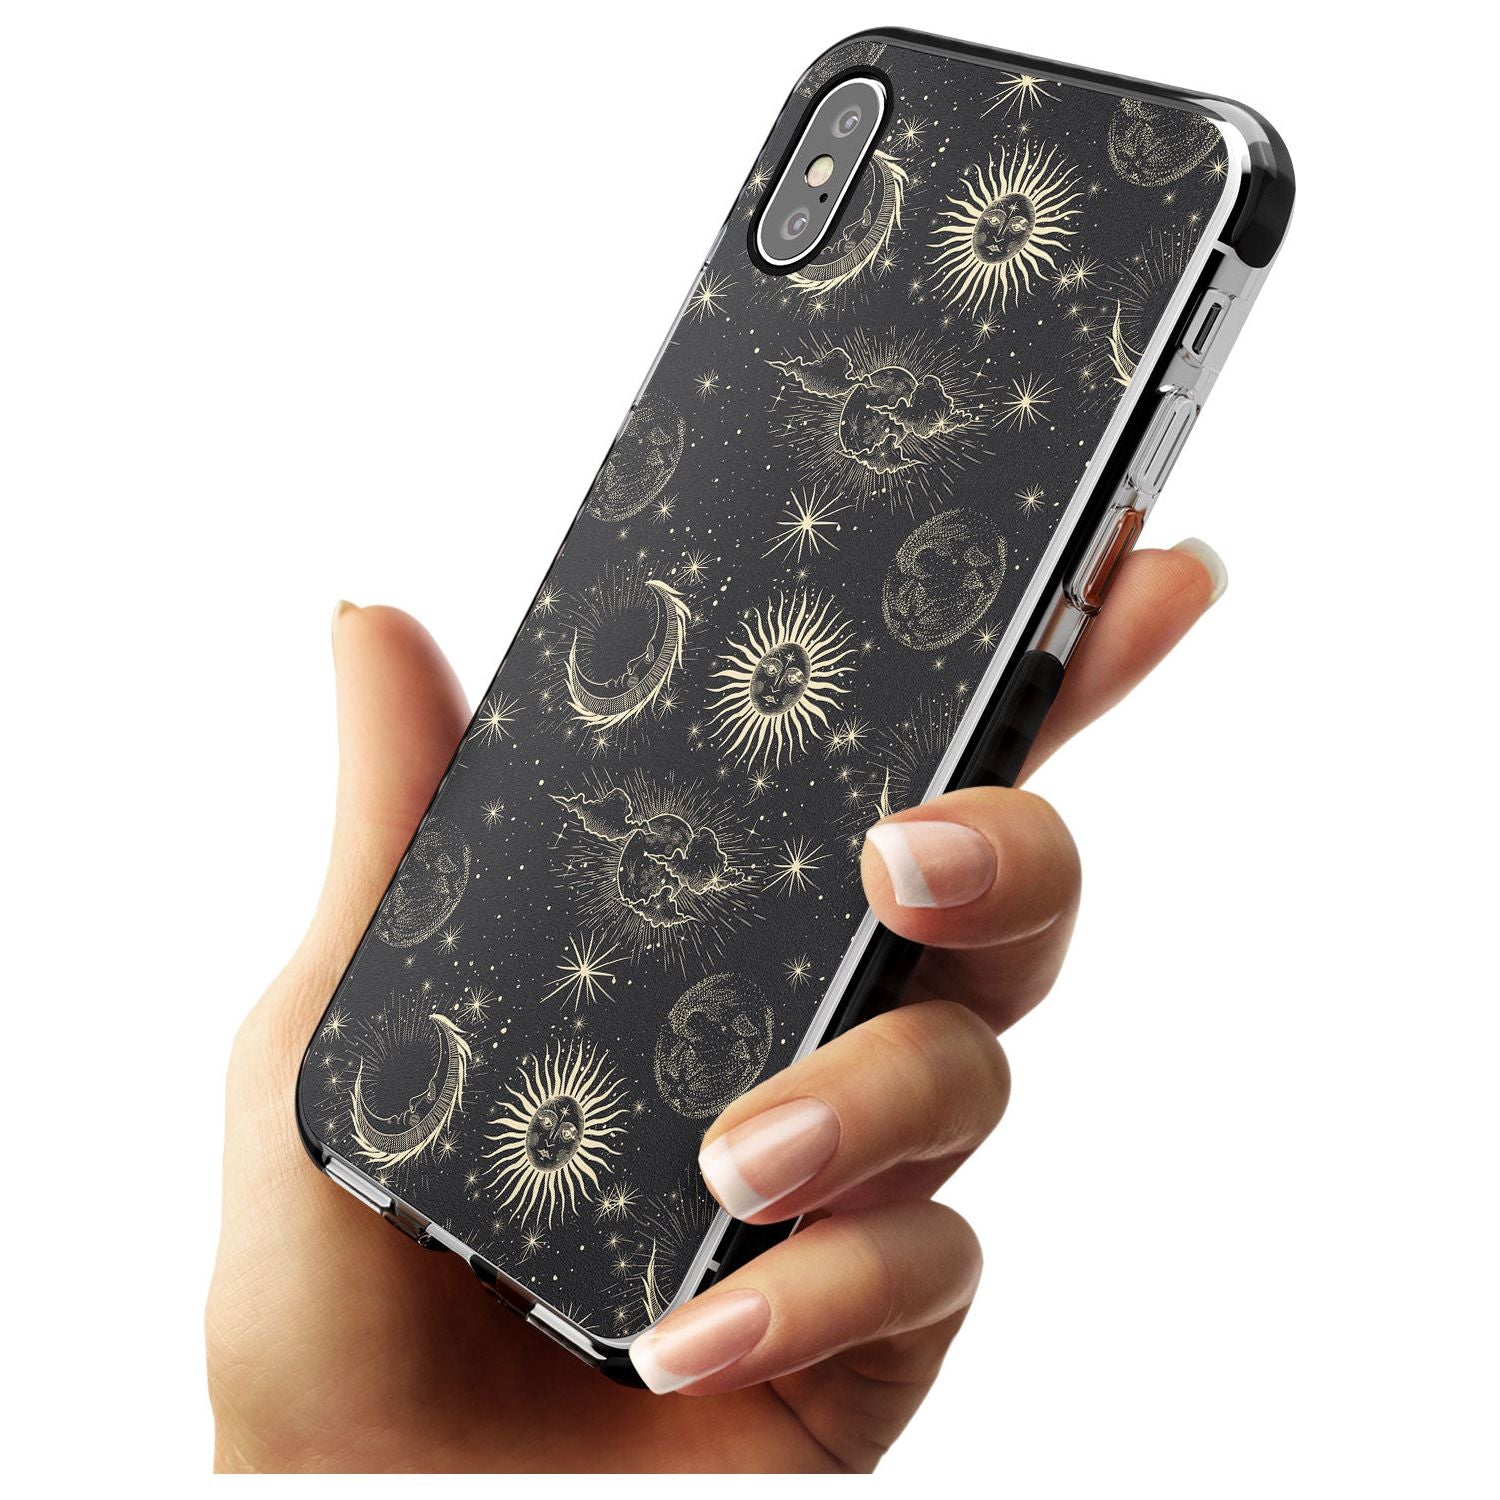 Large Suns, Moons & Clouds Pink Fade Impact Phone Case for iPhone X XS Max XR